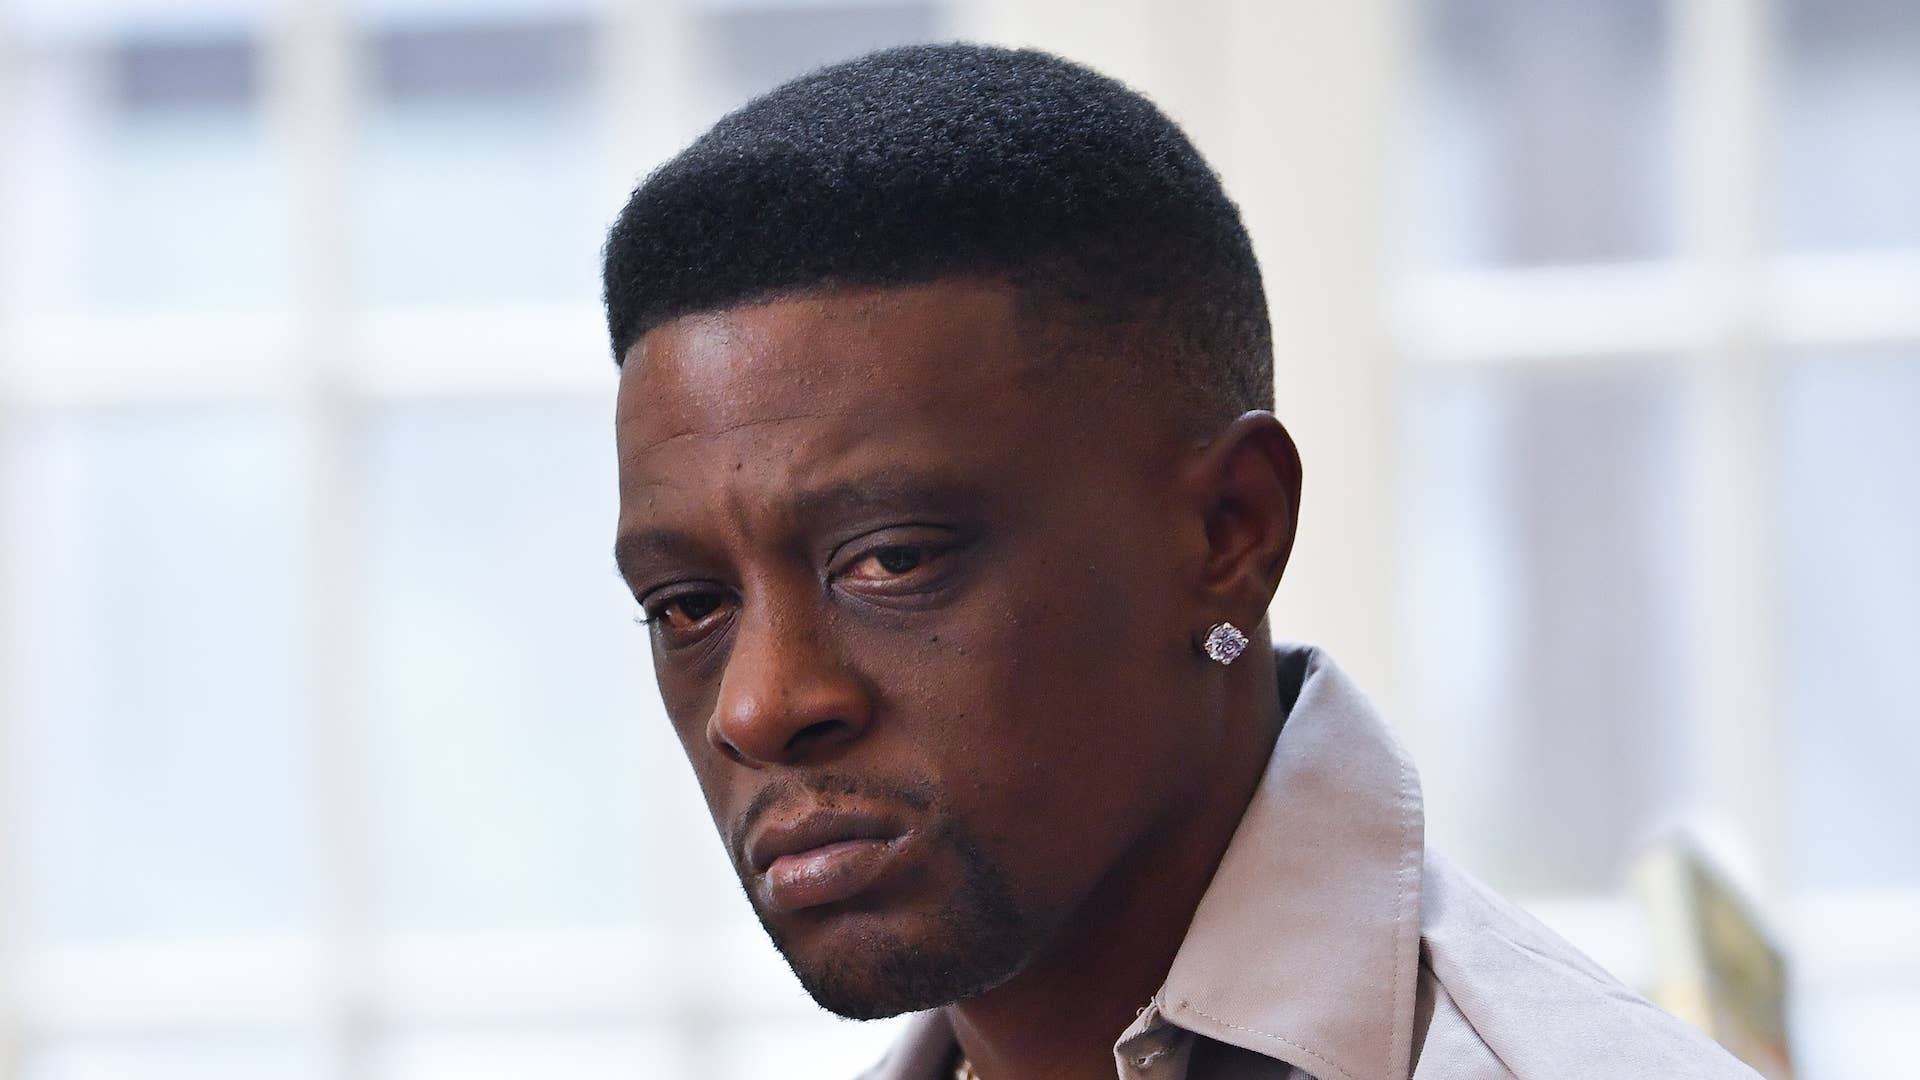 Rapper Lil Boosie on the set of the music Video "Shottas" at Private Residence